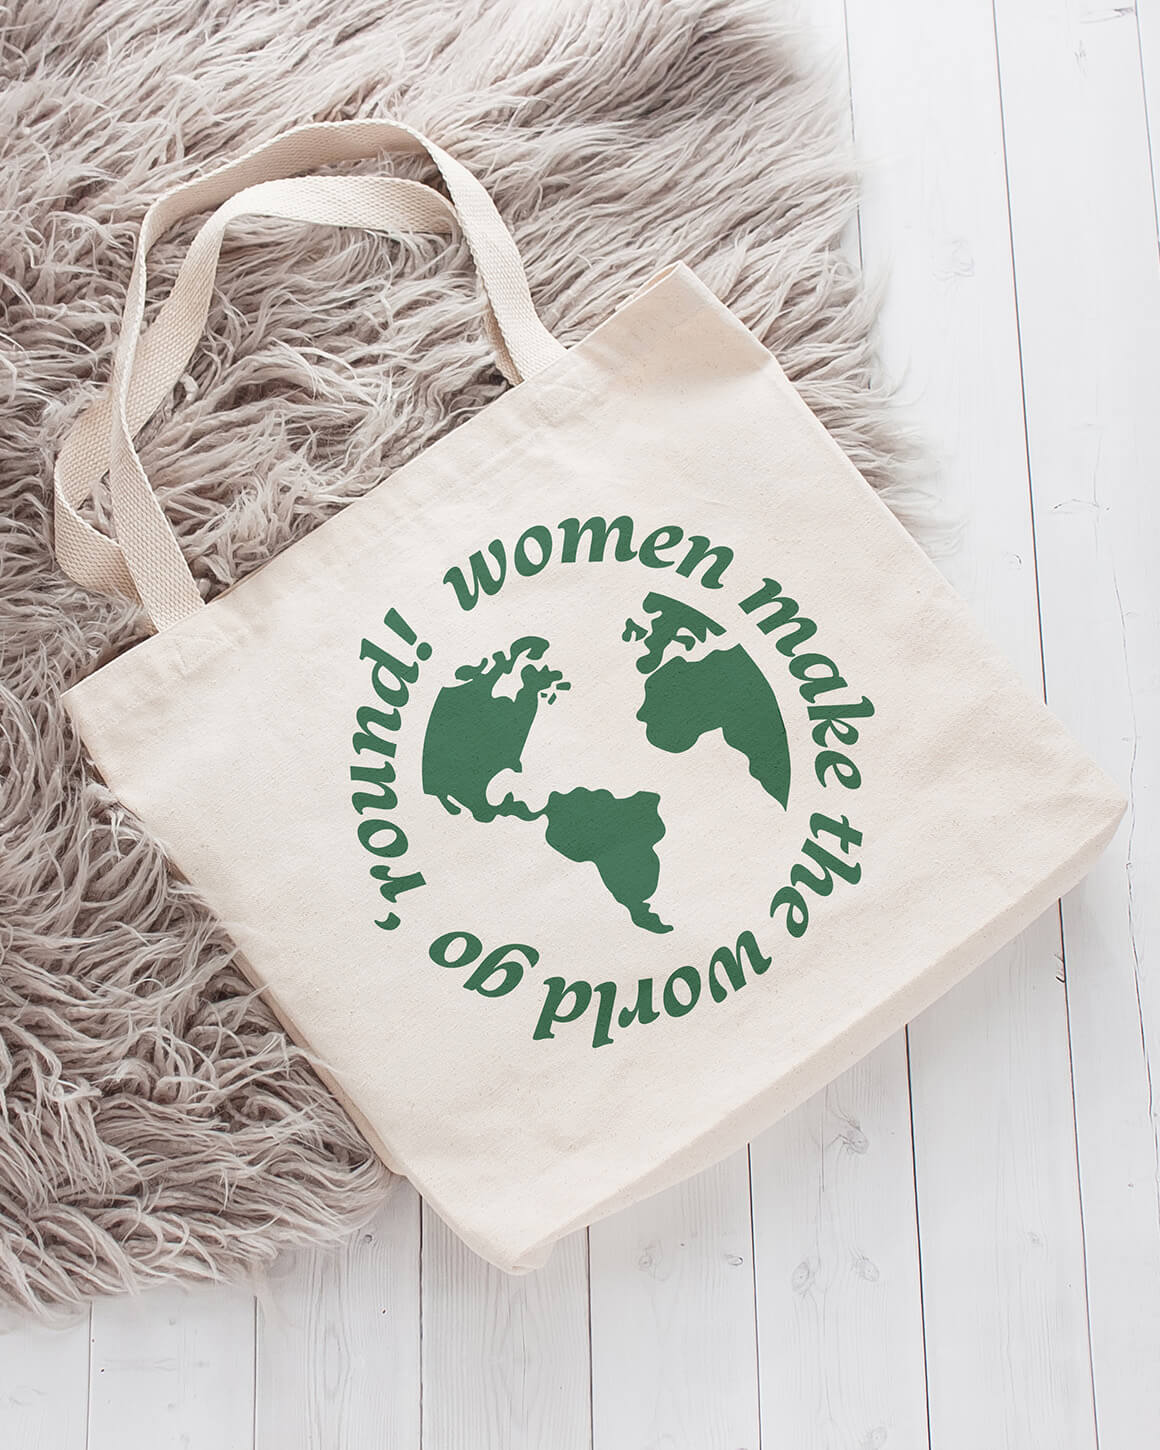 Natural cotton tote with feminist message printed in green